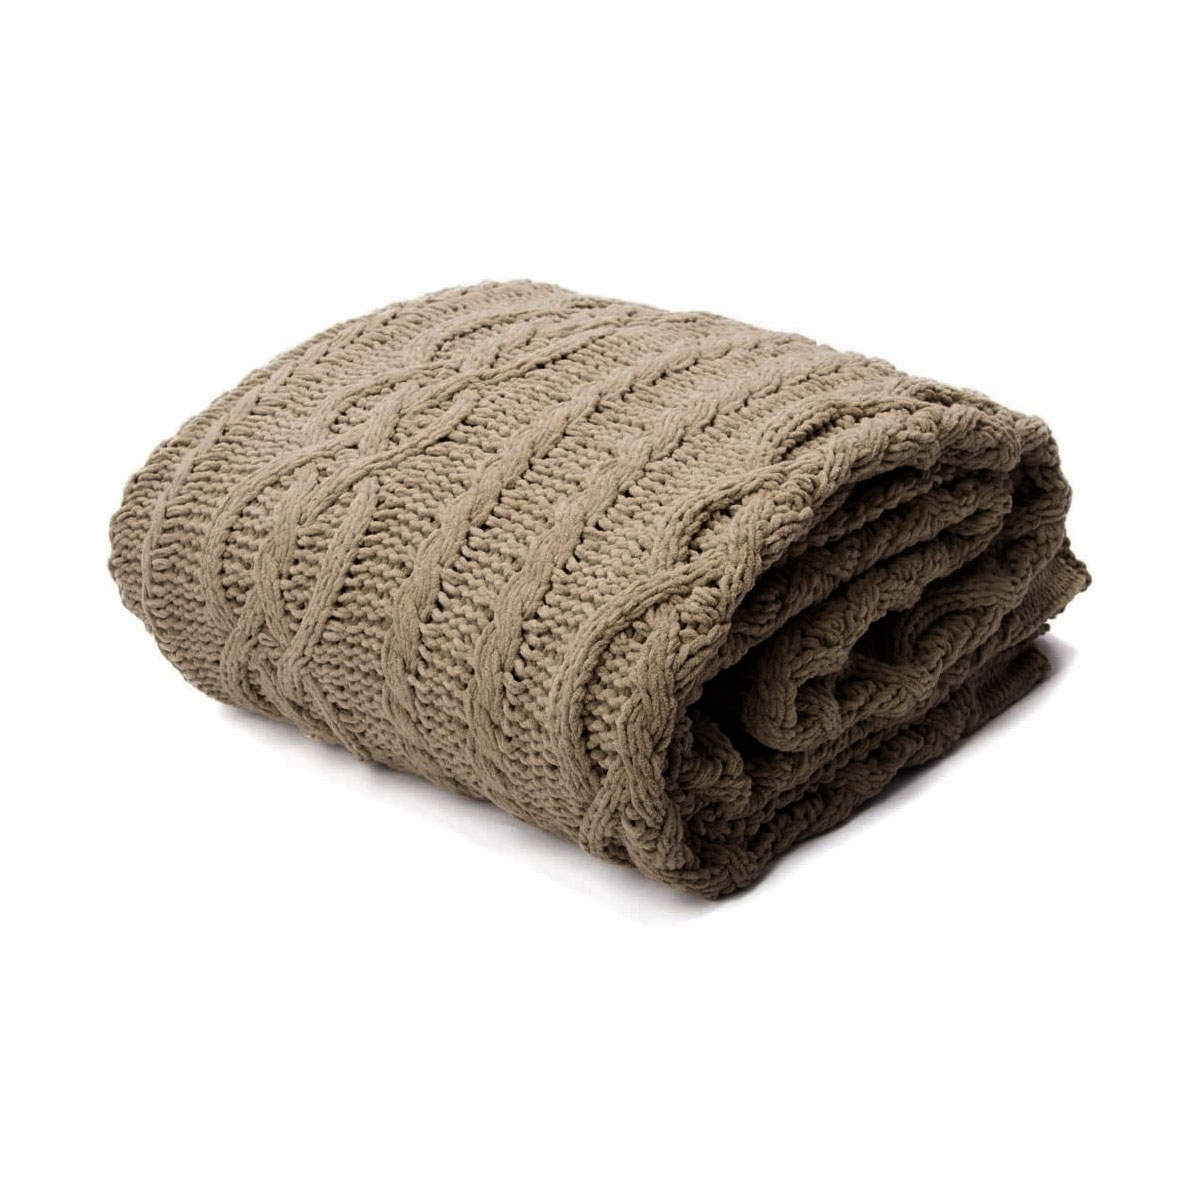 Asher Knitted Throw Rug Price